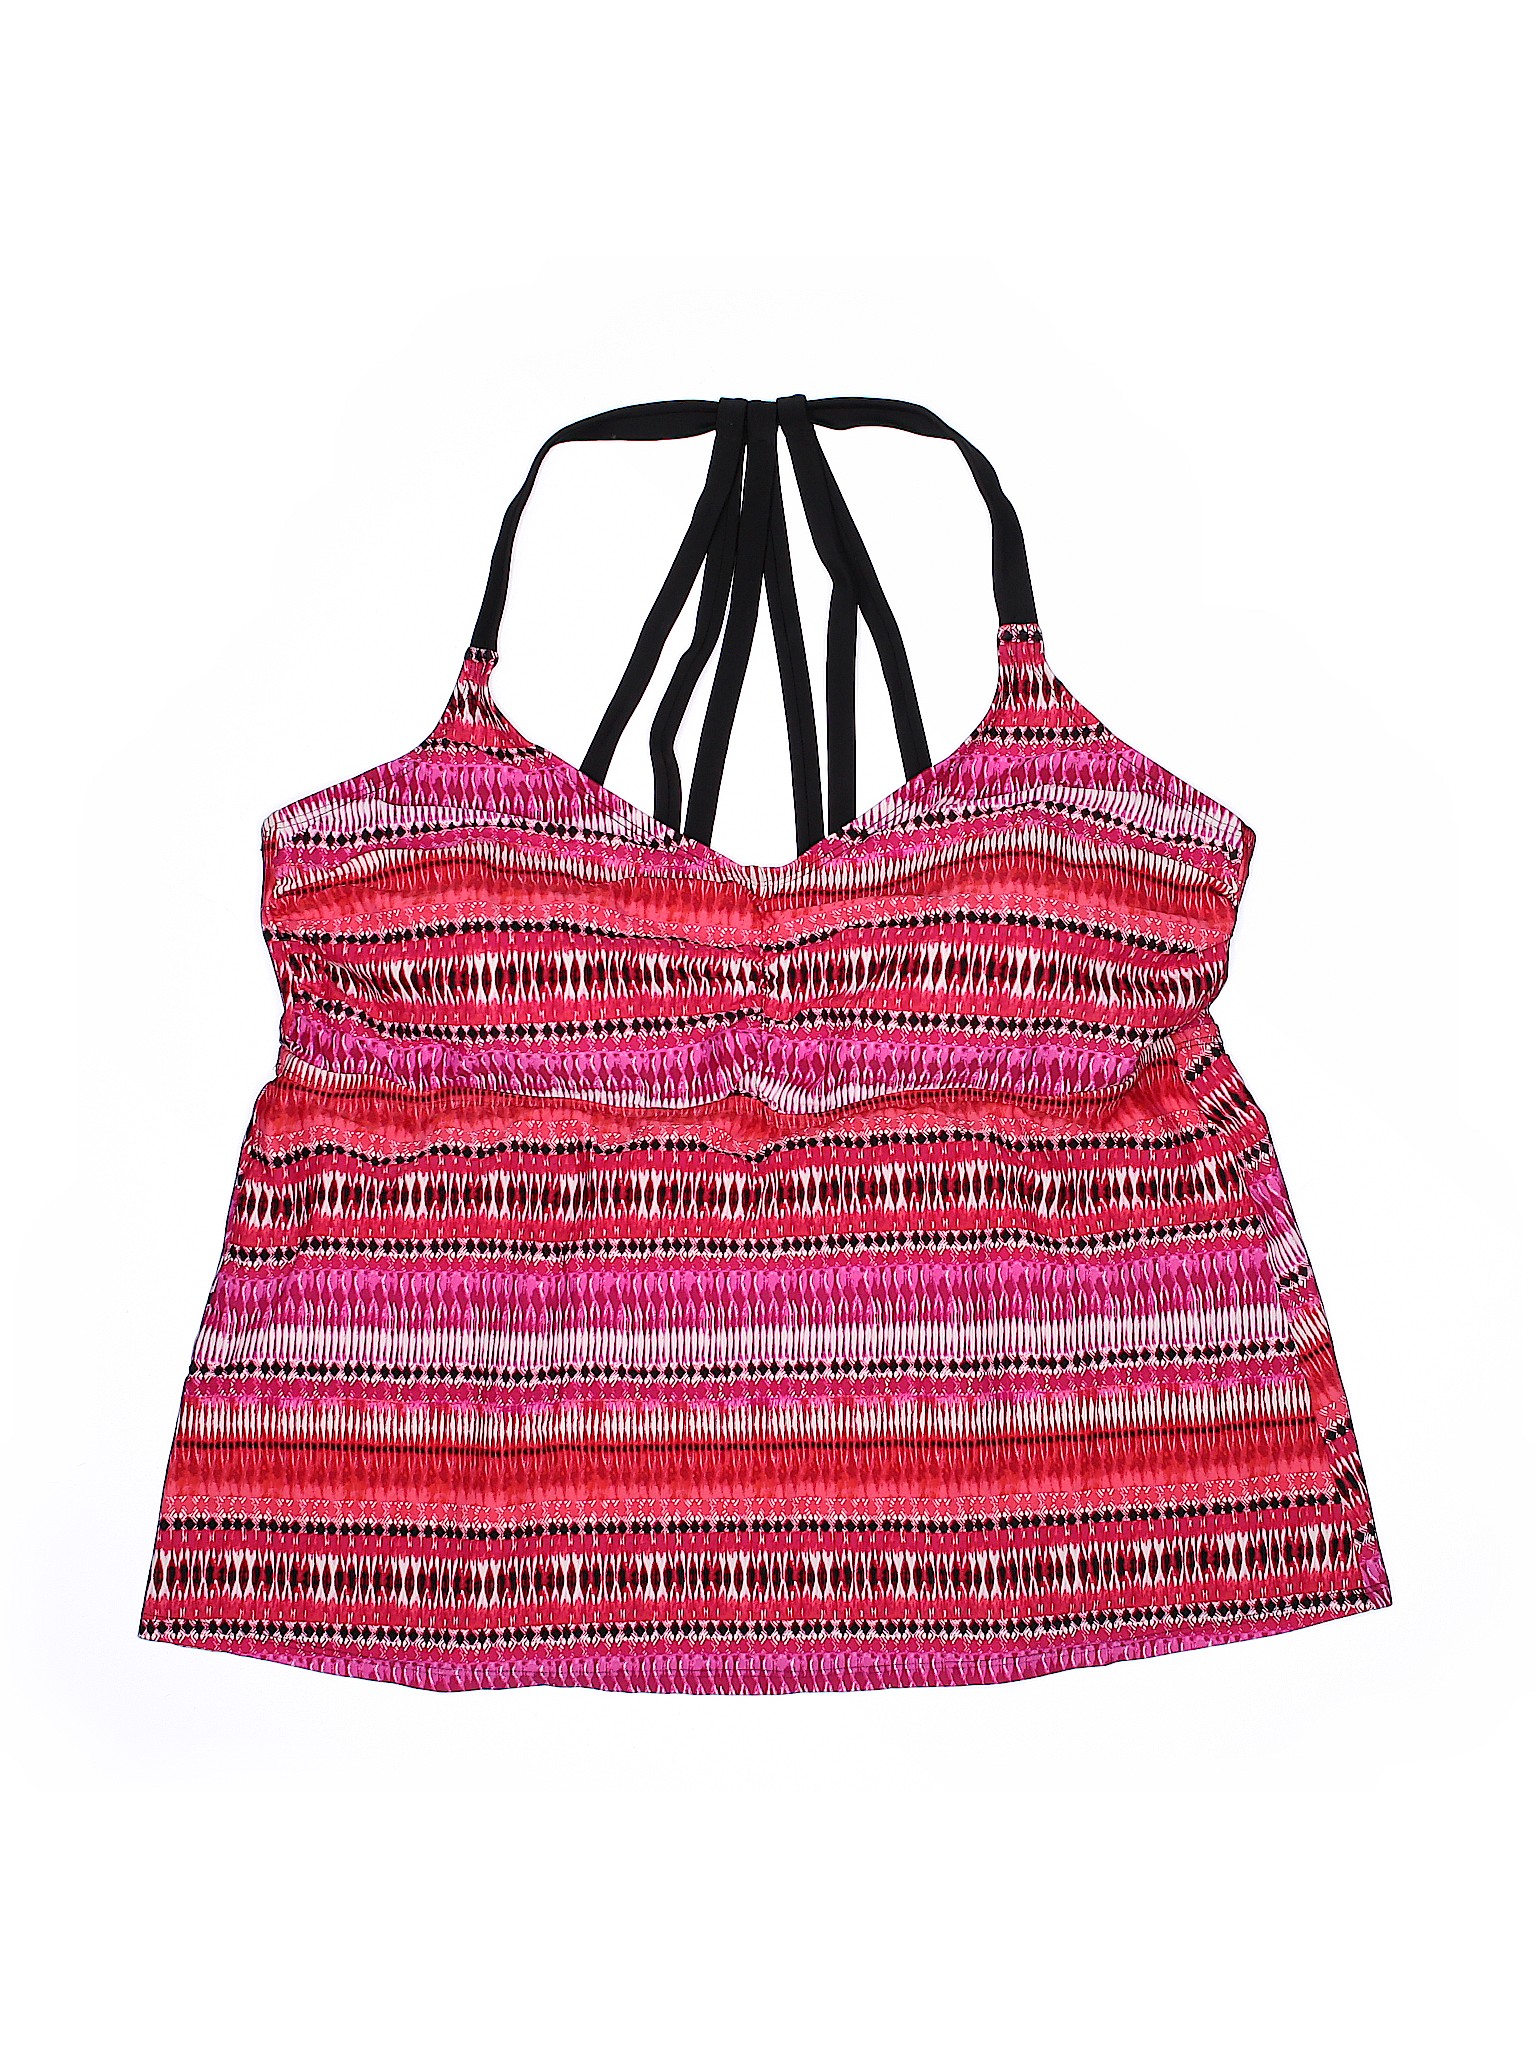 Ava & Viv 100% Recycled Polyester Stripes Pink Swimsuit Top Size 22 ...